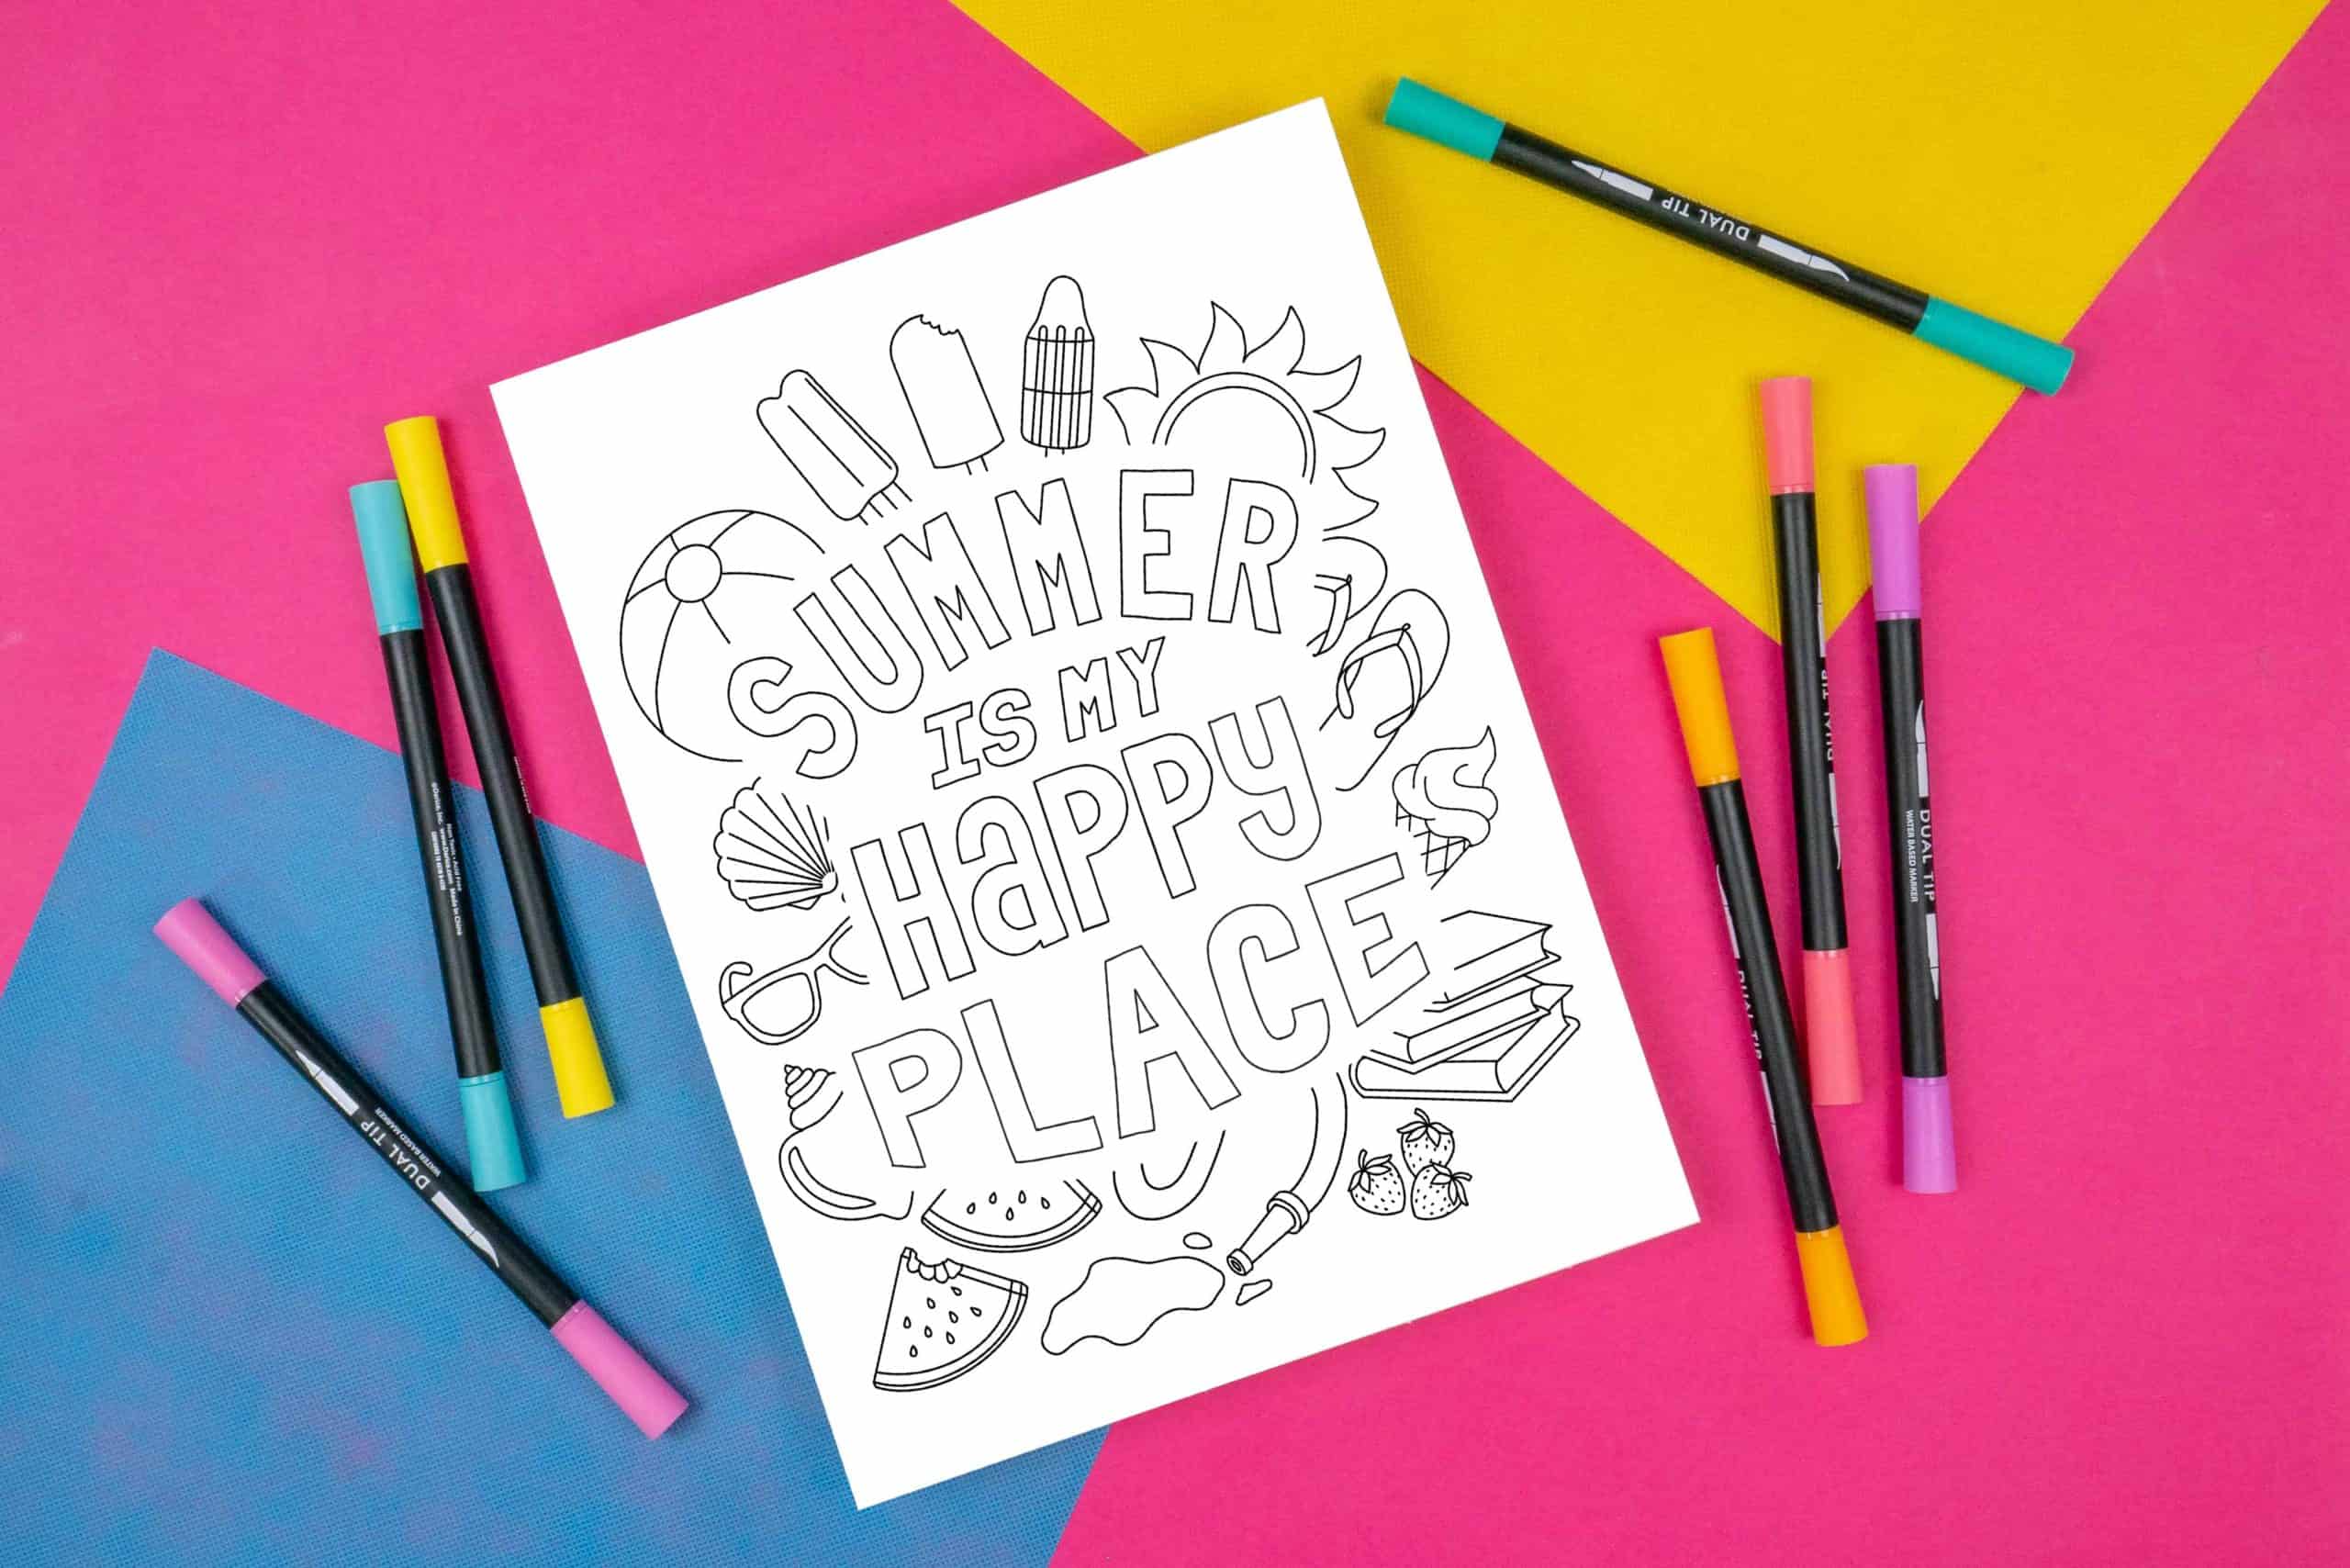 Coloring page with the words 